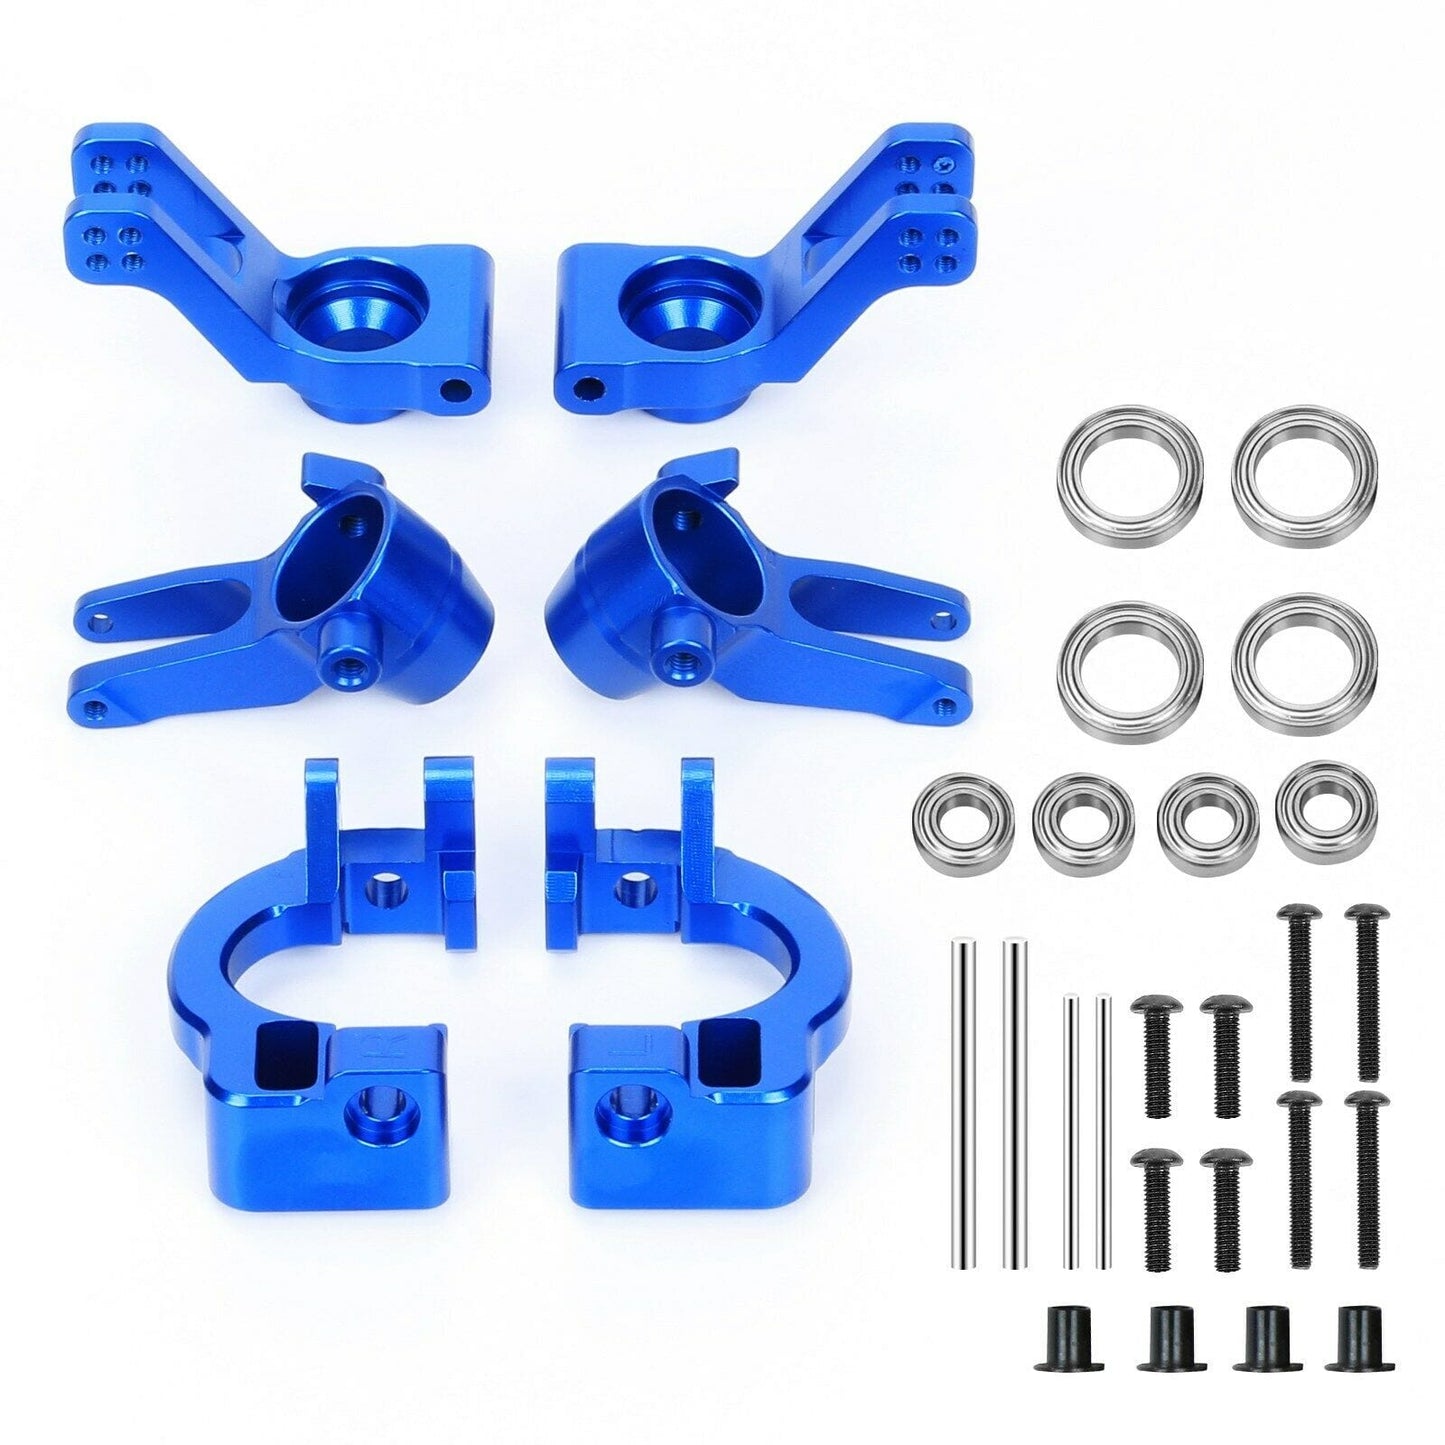 RCAWD Blue RCAWD ARRMA Infraction Vendetta 3S Rear C Steering Hub Carrier